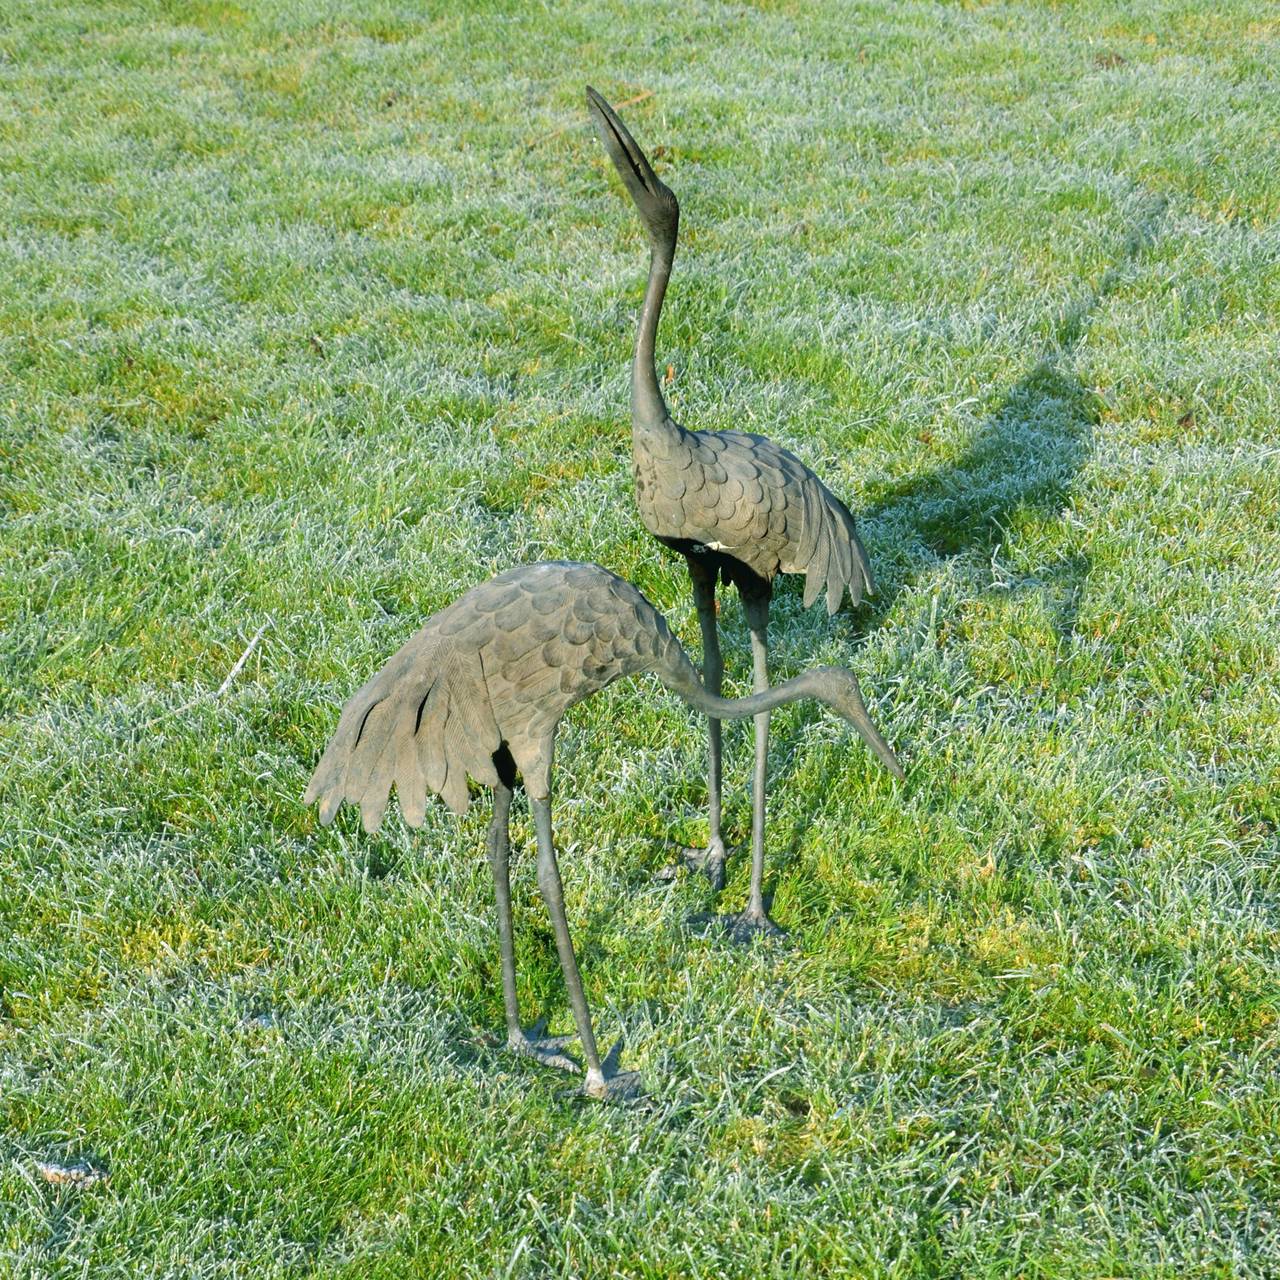 One upstanding with the second stooped. Remnants of the original red paint are on the crown. 

Tallest crane height: 61 cm (2 ft) 
Shortest crane height: 37 cm (1 ft 2 1/2 ins) 

The Red-crowned Crane (Grus japonensis) is the second rarest